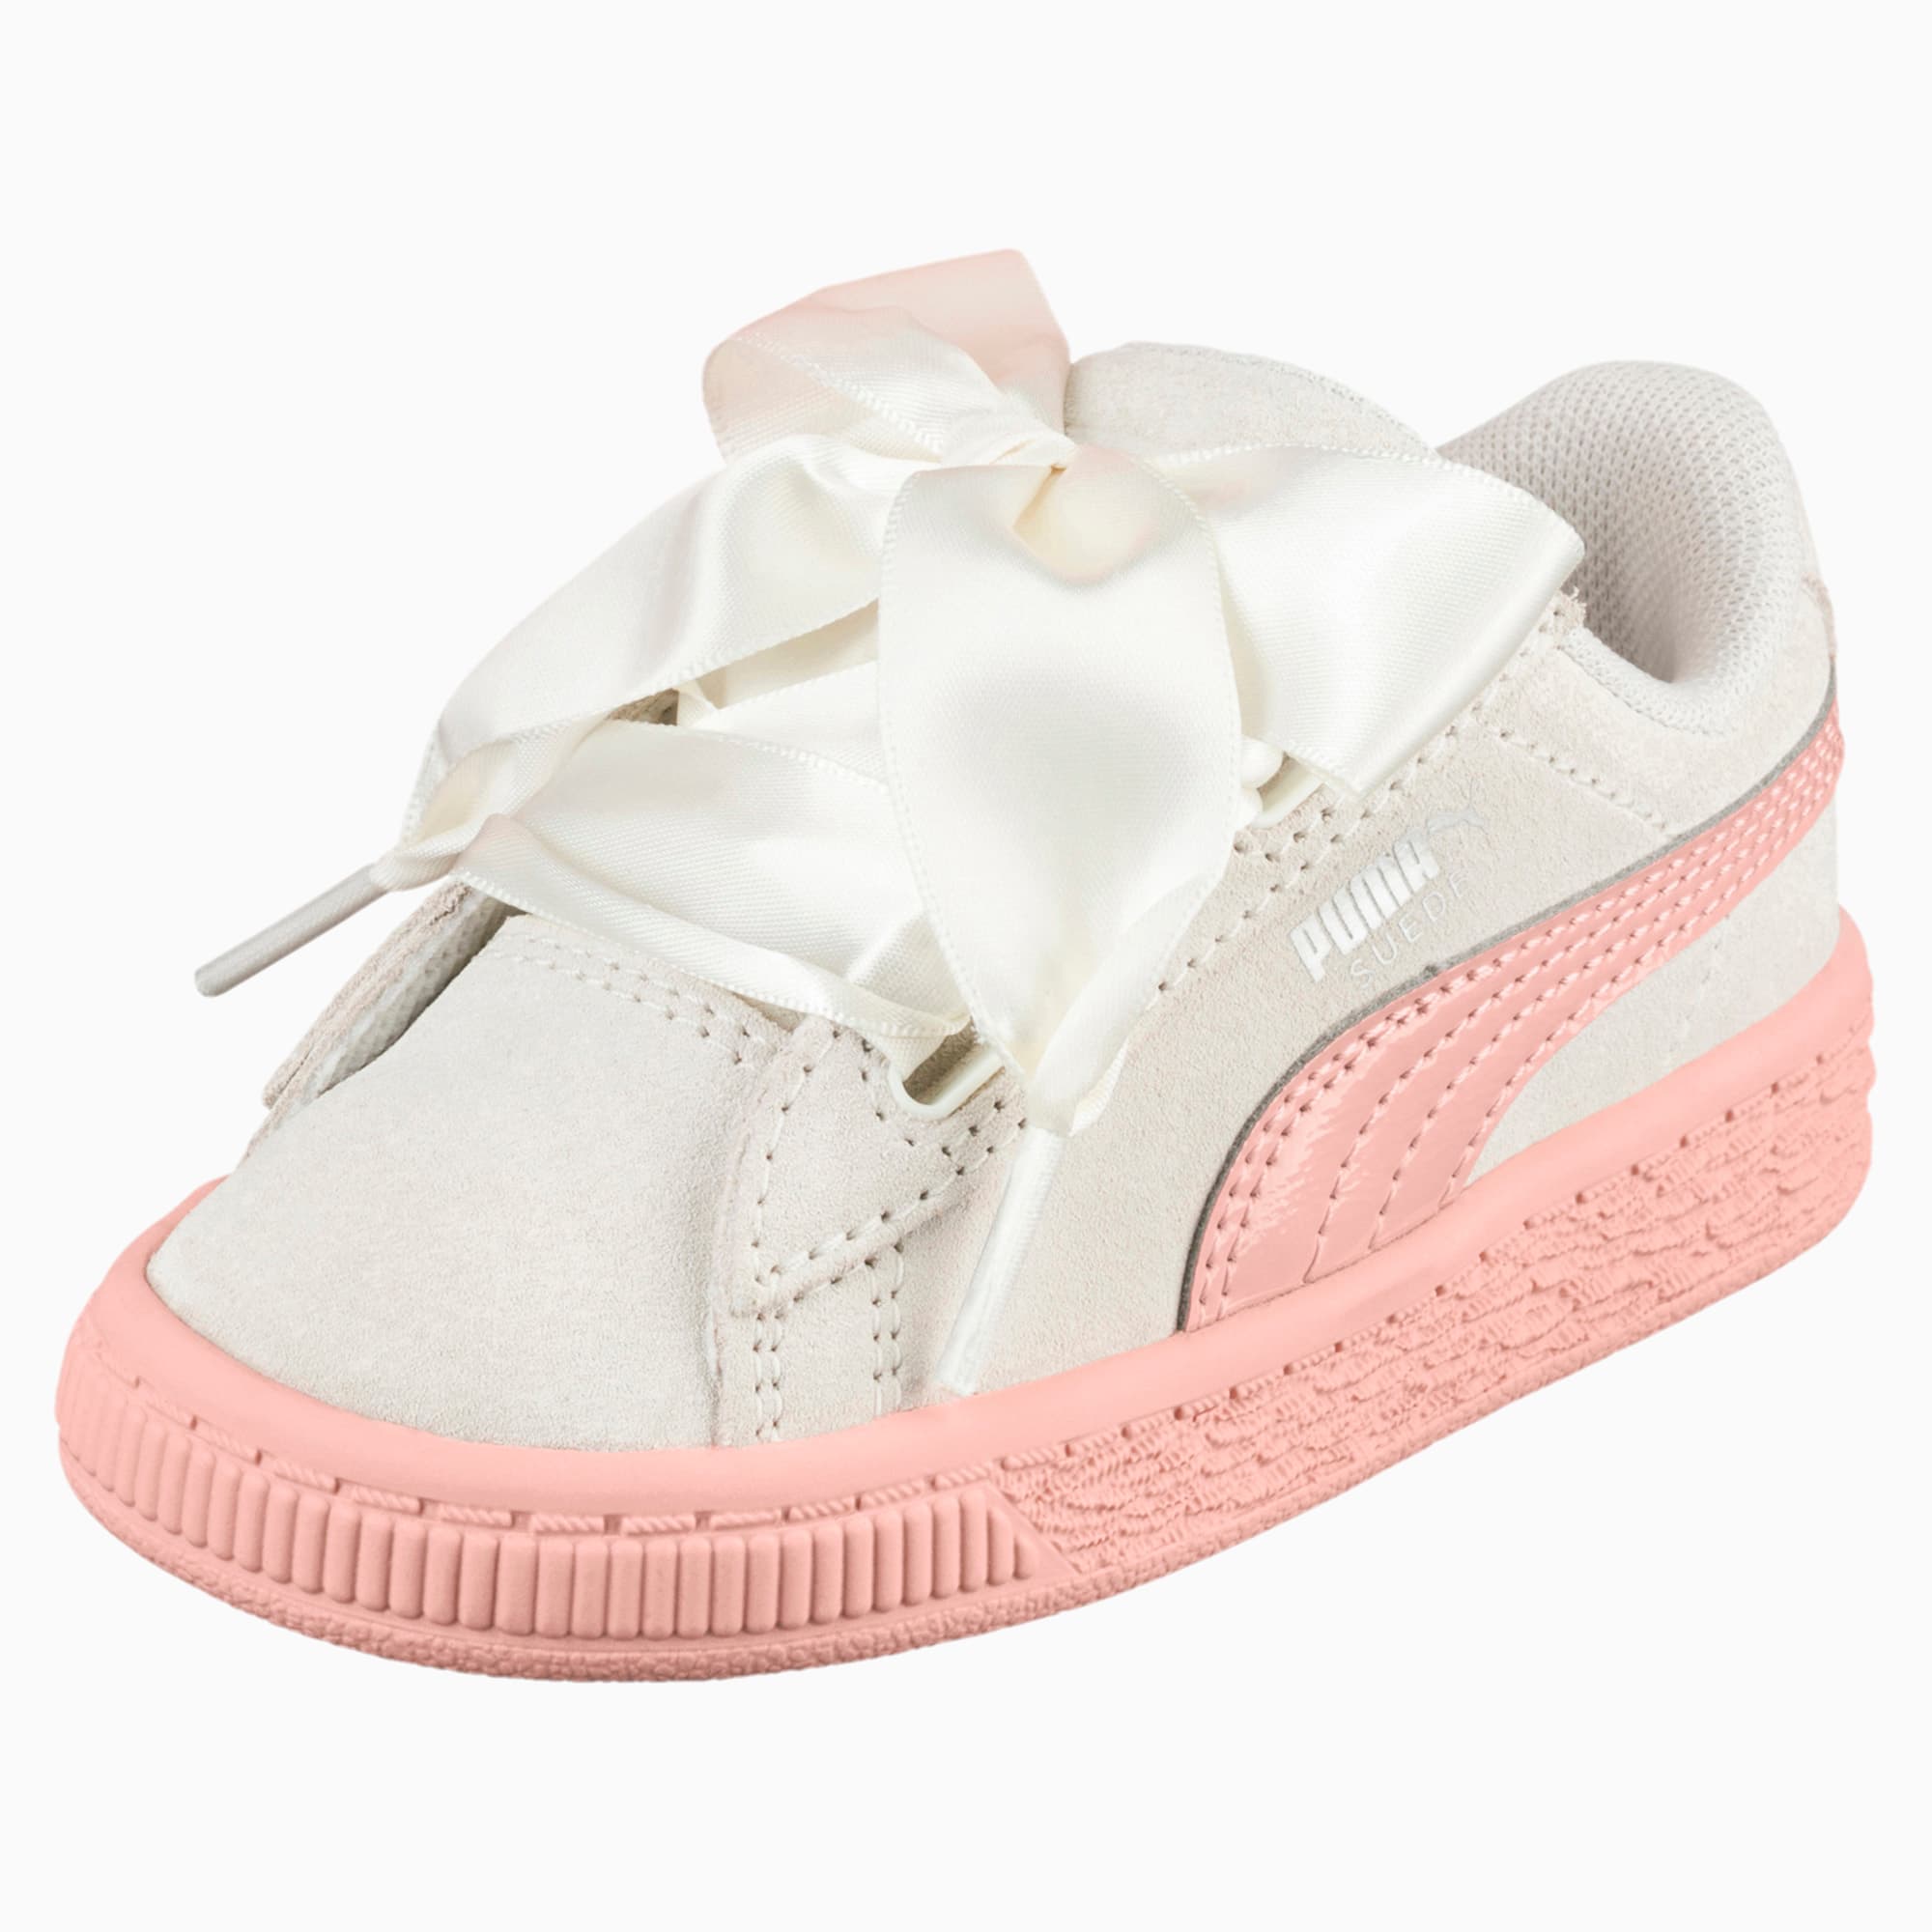 Suede Heart Jewel Toddler Shoes | PUMA US